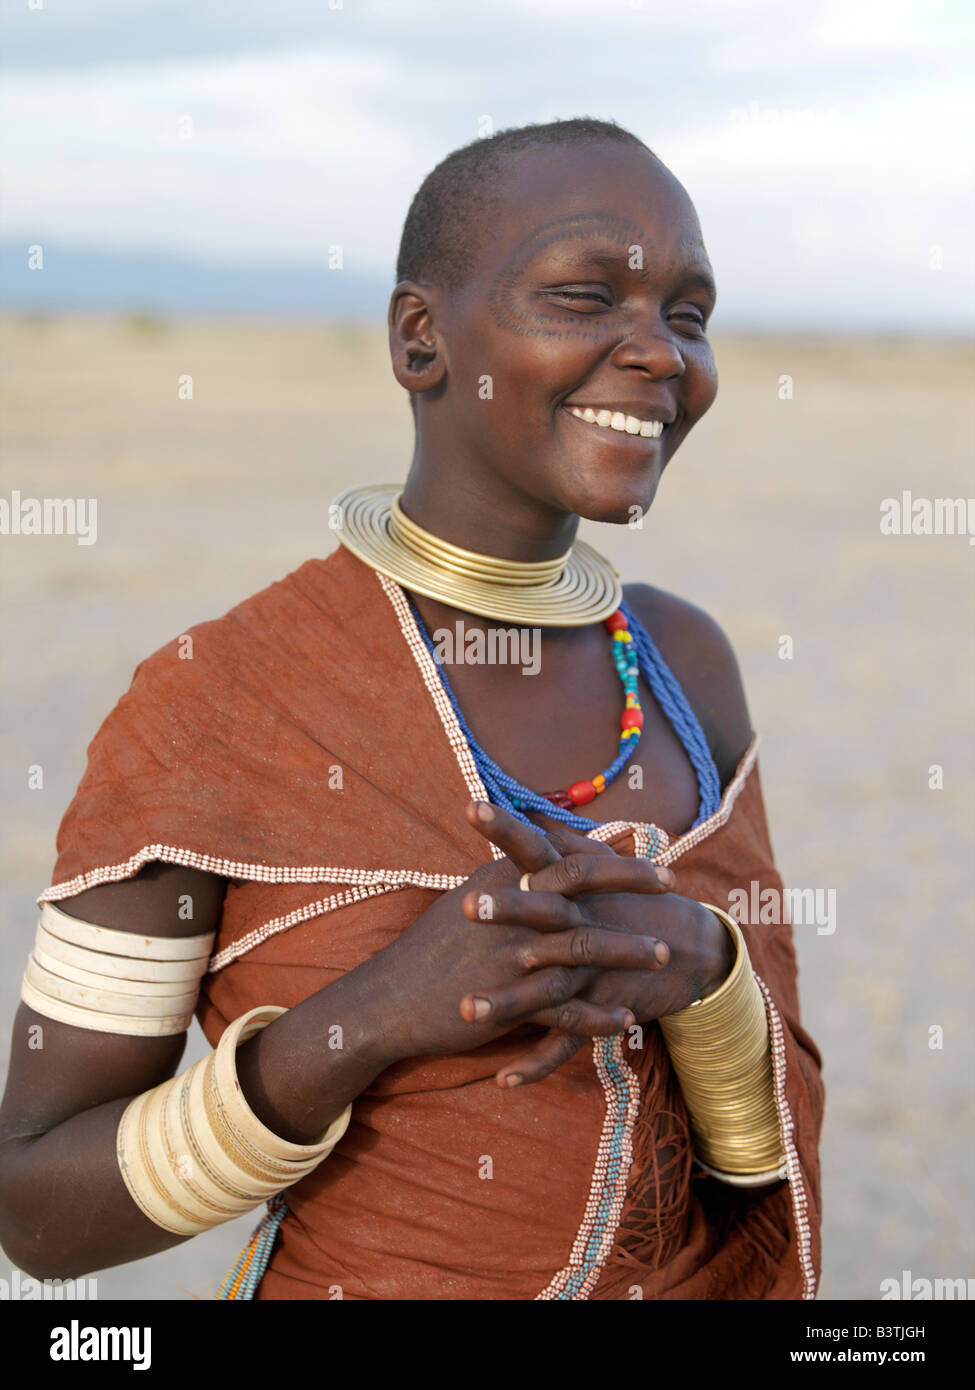 Tanzania, Northern Tanzania, Manyara. A Datoga woman in jovial mood. The traditional attire of Datoga women includes beautifully tanned and decorated leather dresses and coiled brass armulets and necklaces. Yellow and light blue are the preferred colours of the beads they wear. Scarification of the face is not uncommon among women and girls.The Datoga (known to their Maasai neighbours as the Mang'ati and to the Iraqw as Babaraig) live in northern Tanzania and are primarily pastoralists. Stock Photo